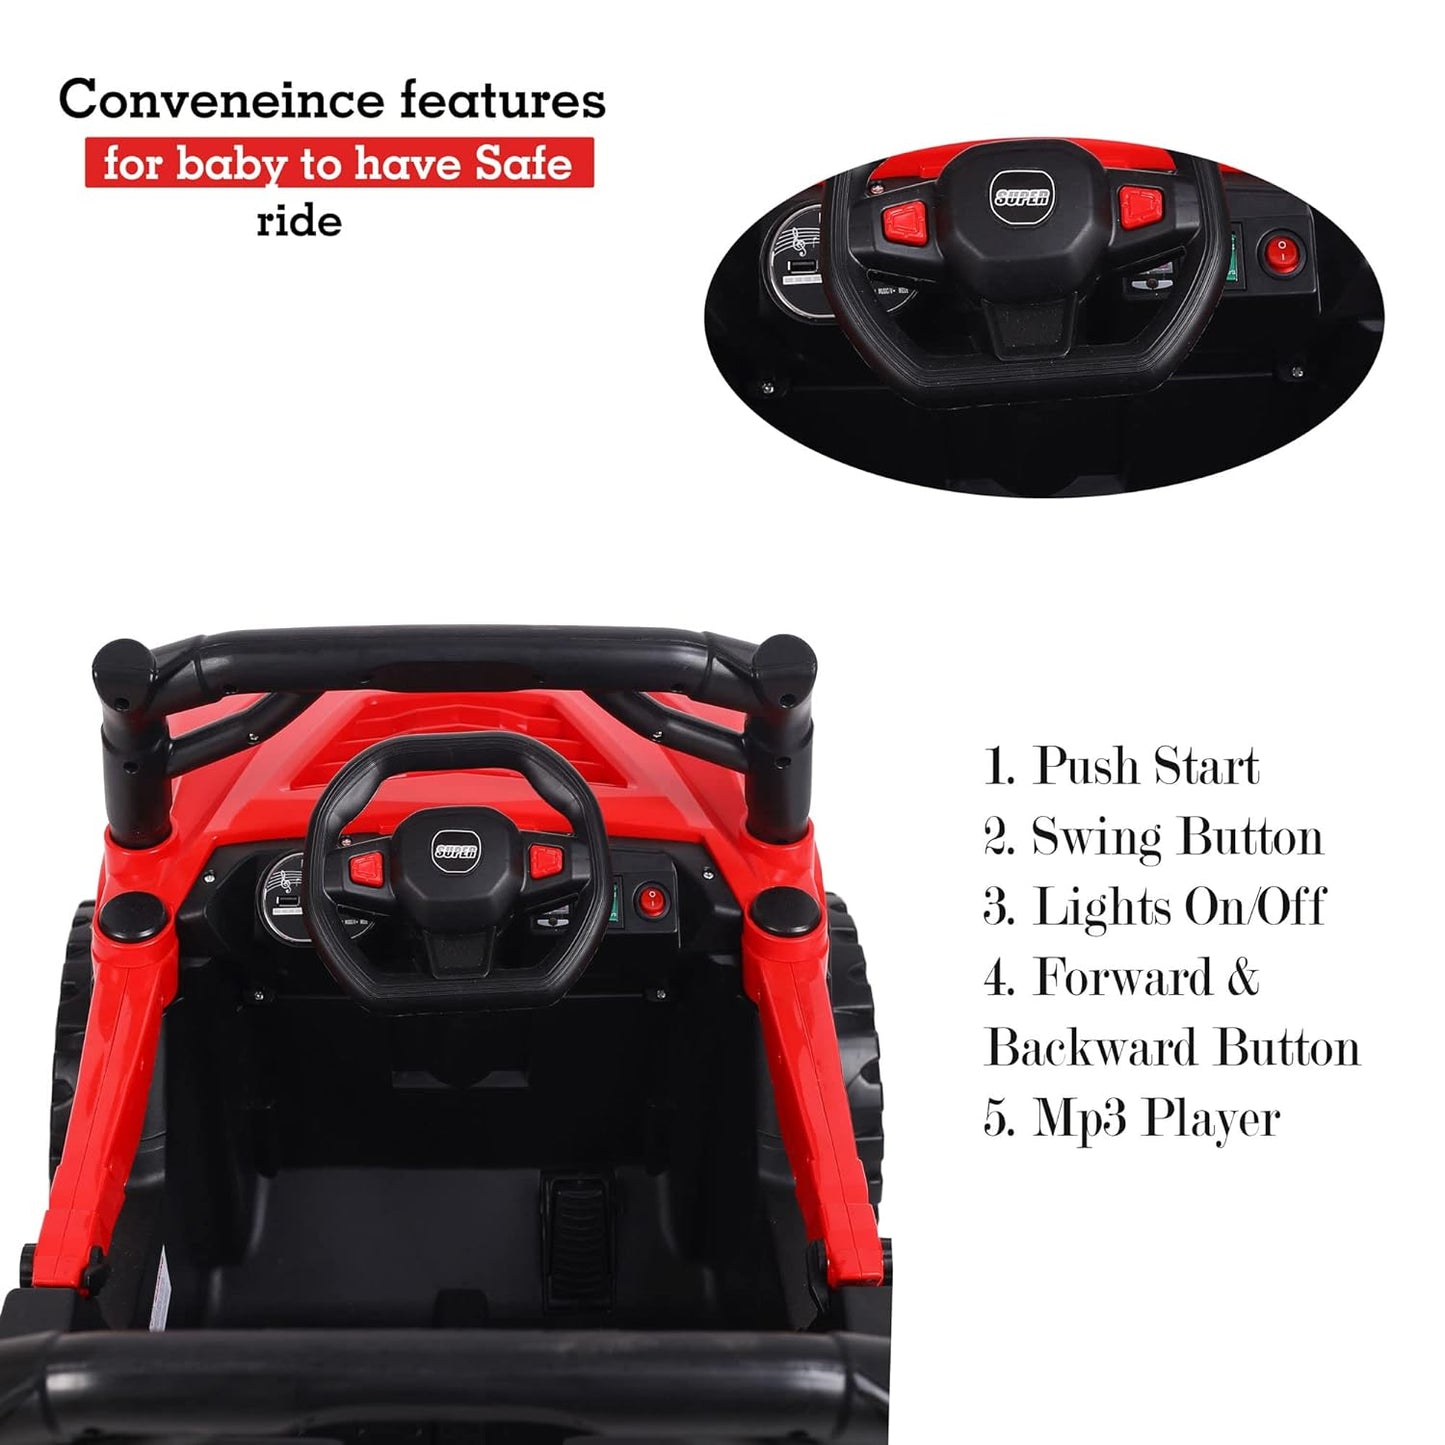 GettBoles 907 4X4 Electric Rechargeable Ride on Jeep for Kids of Age 2 to 4 Years- The Battery Operated Kids Jeep with Music, Led Lights and Bluetooth Remote (Red)